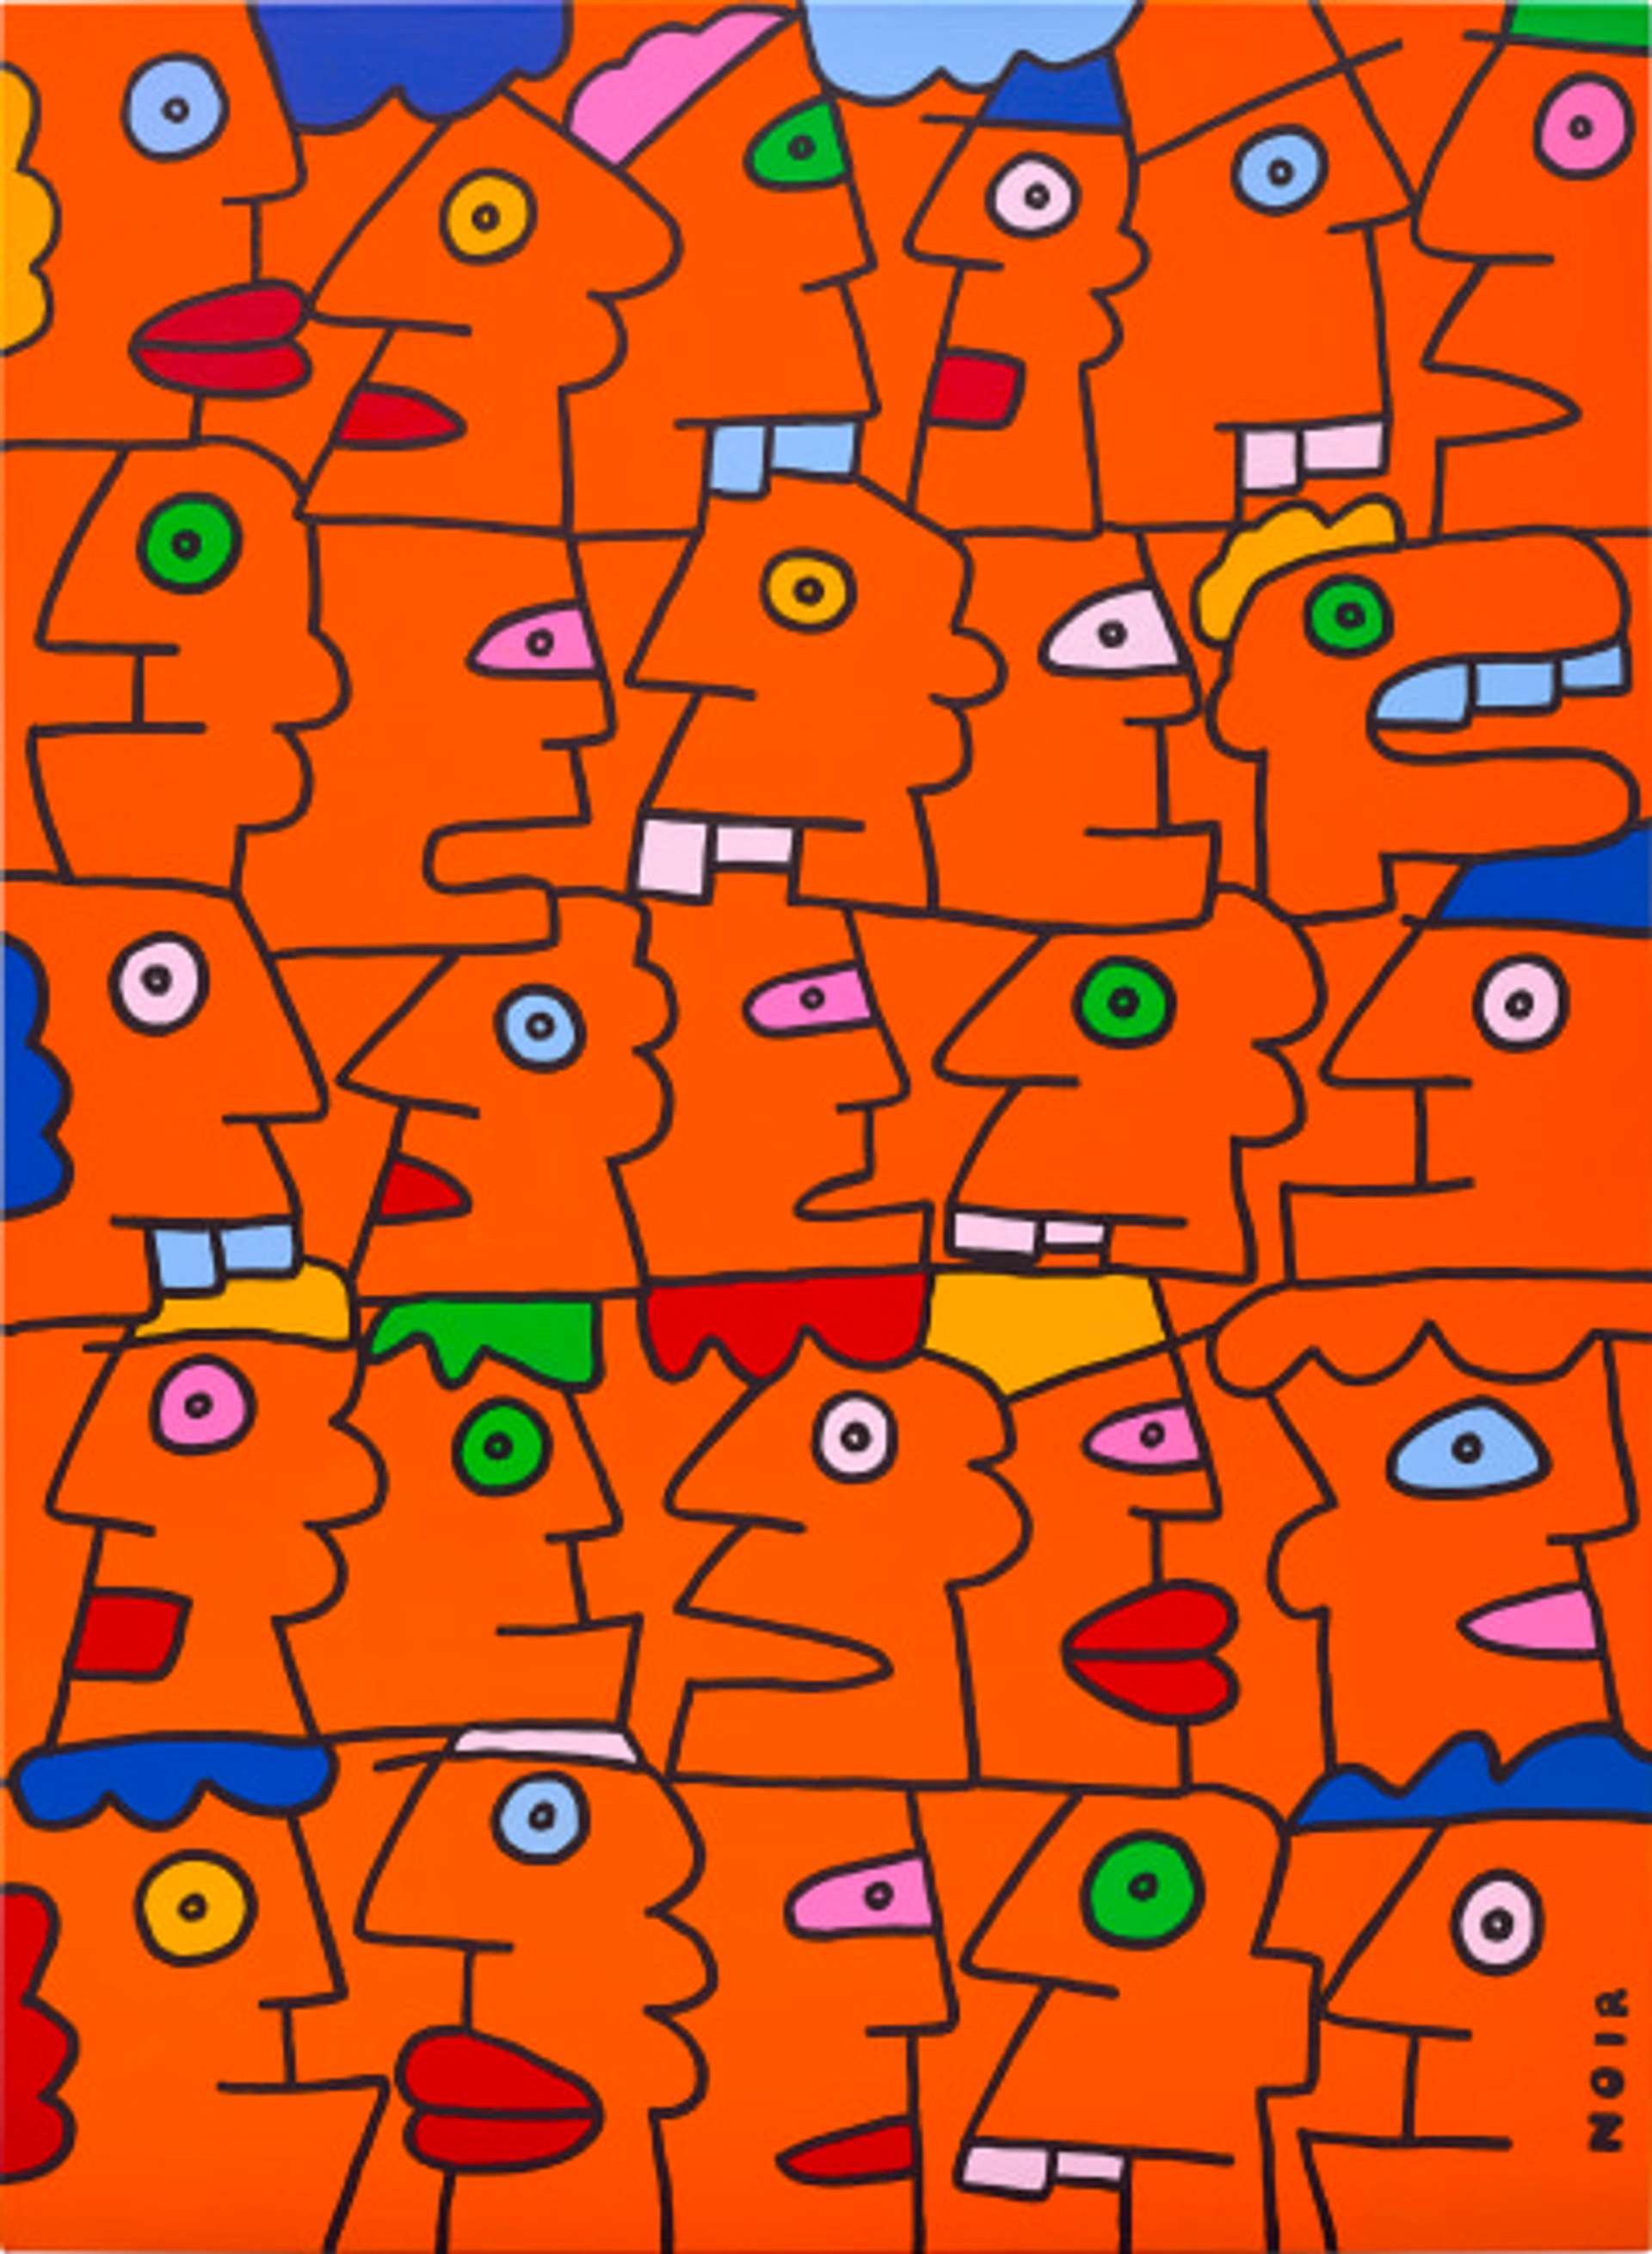 A vibrant orange canvas featuring perfectly puzzled side profiled caricatured faces drawn with thick black lines. The faces have exaggerated red lips, vibrant blue hair, and different-colored eyeballs. The artwork is signed "NOIR" in the bottom right-hand corner.